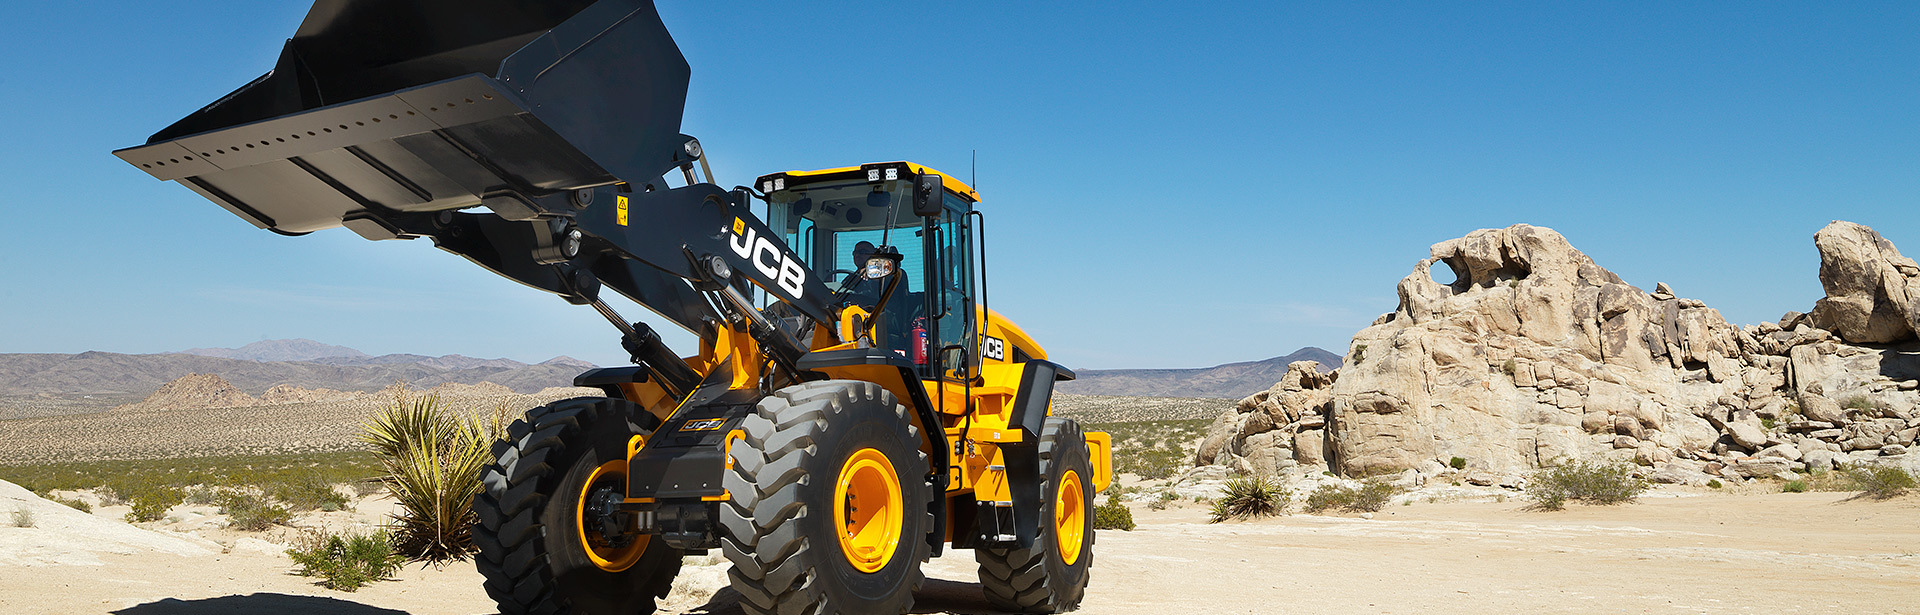 Image of a Wheel Loaders